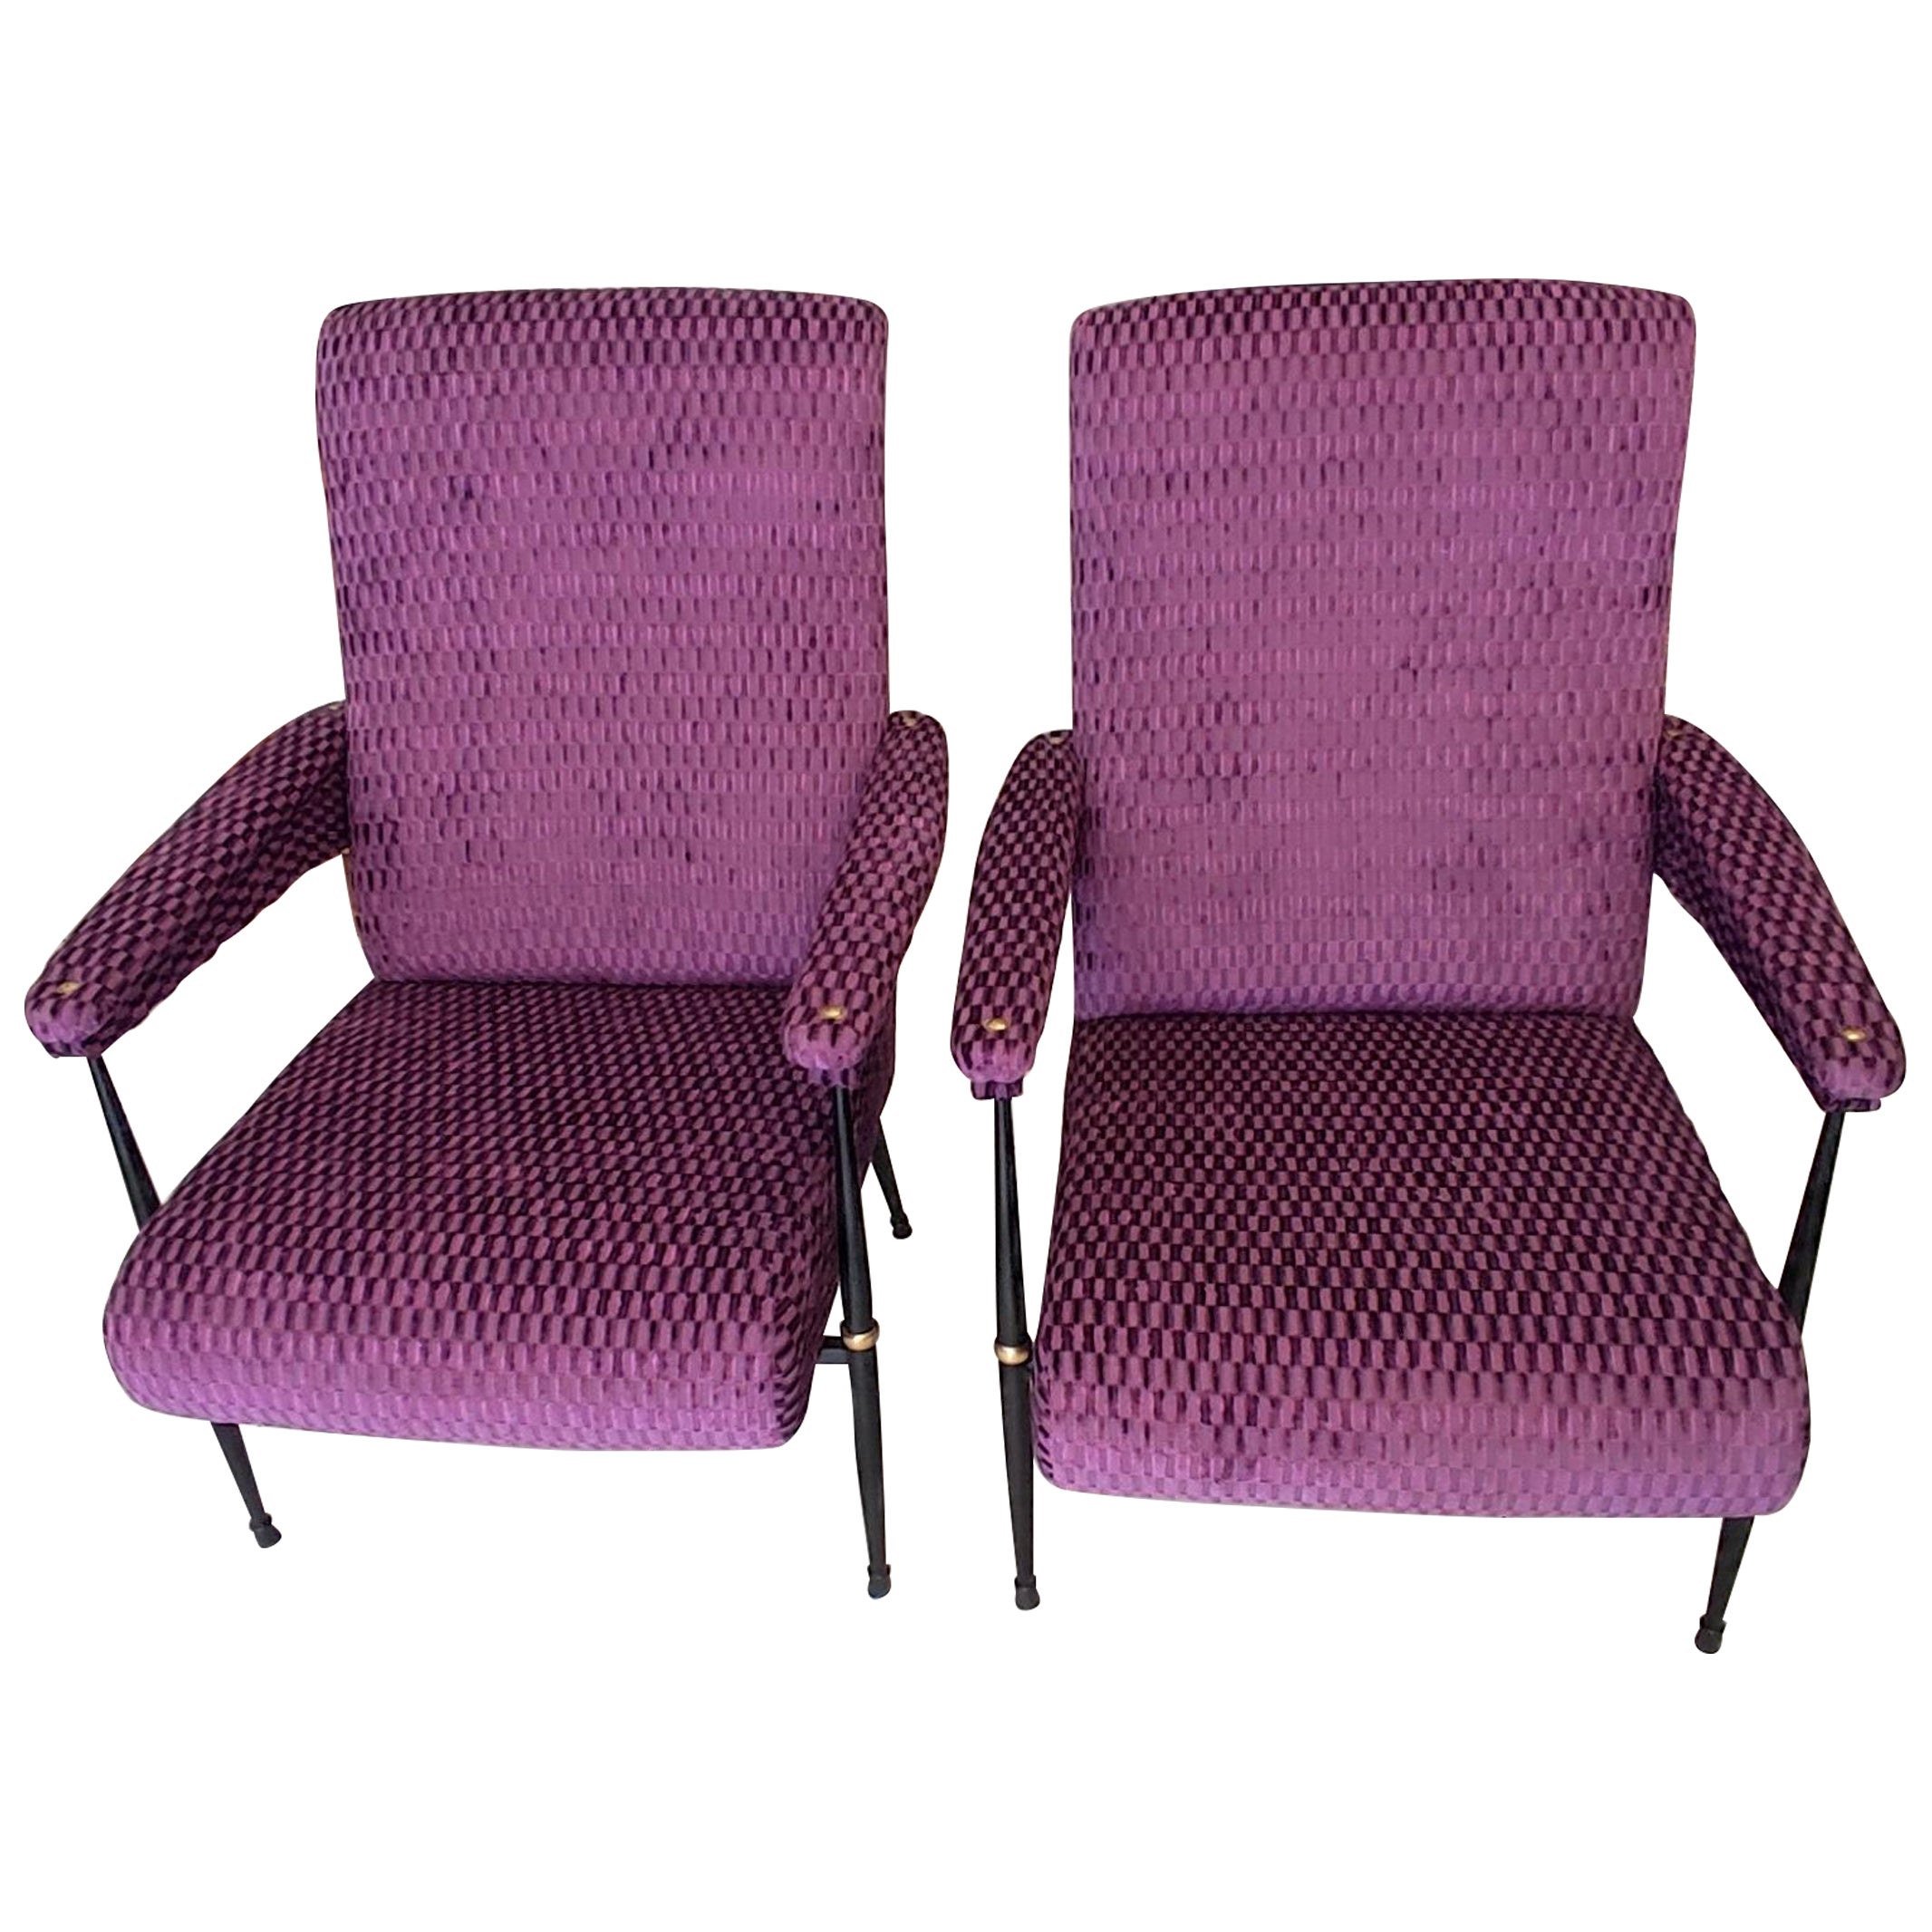 Pair of 1960s armchairs in purple fabric